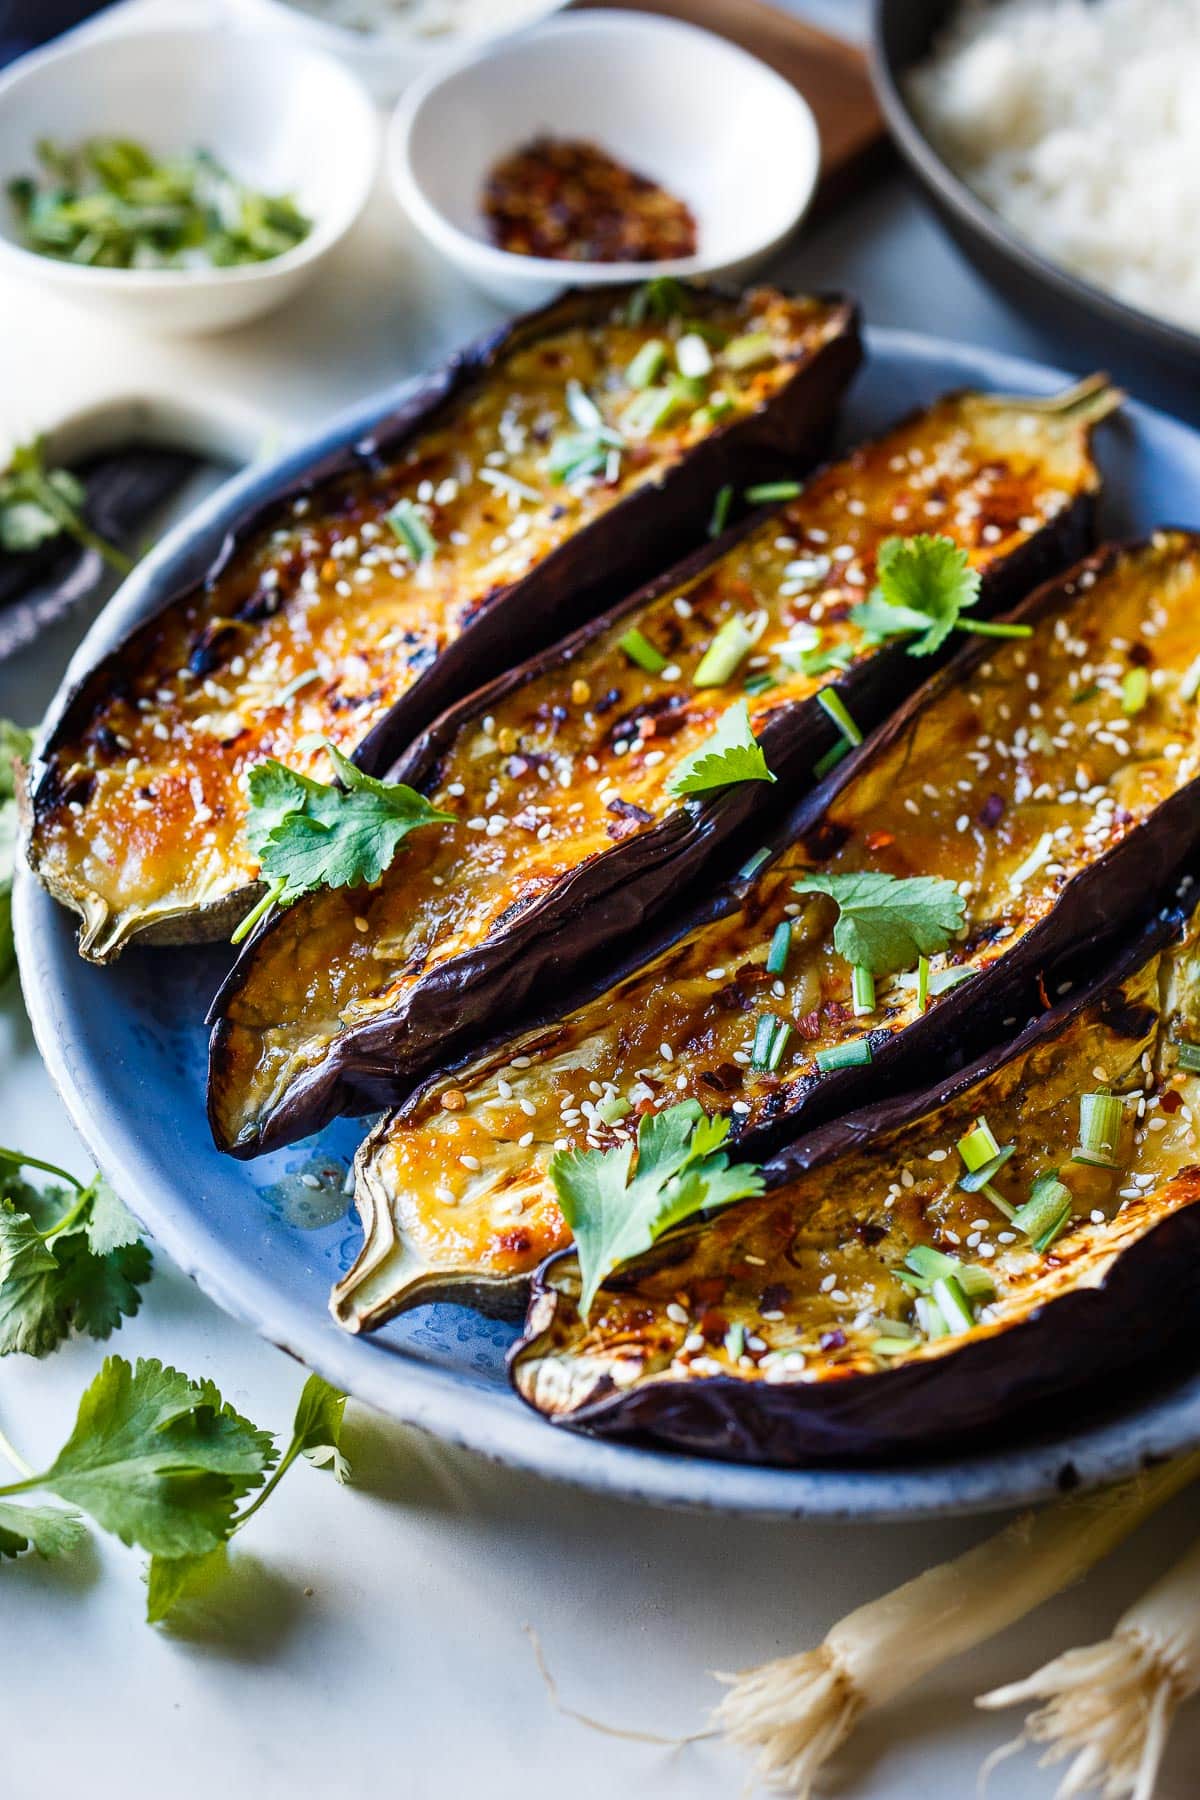 Miso Roasted Eggplant (Nasu Dengaku) is caramelized with an umami rich miso glaze, a simple vegan main dish or vegetable side dish that is easy and so savory. 